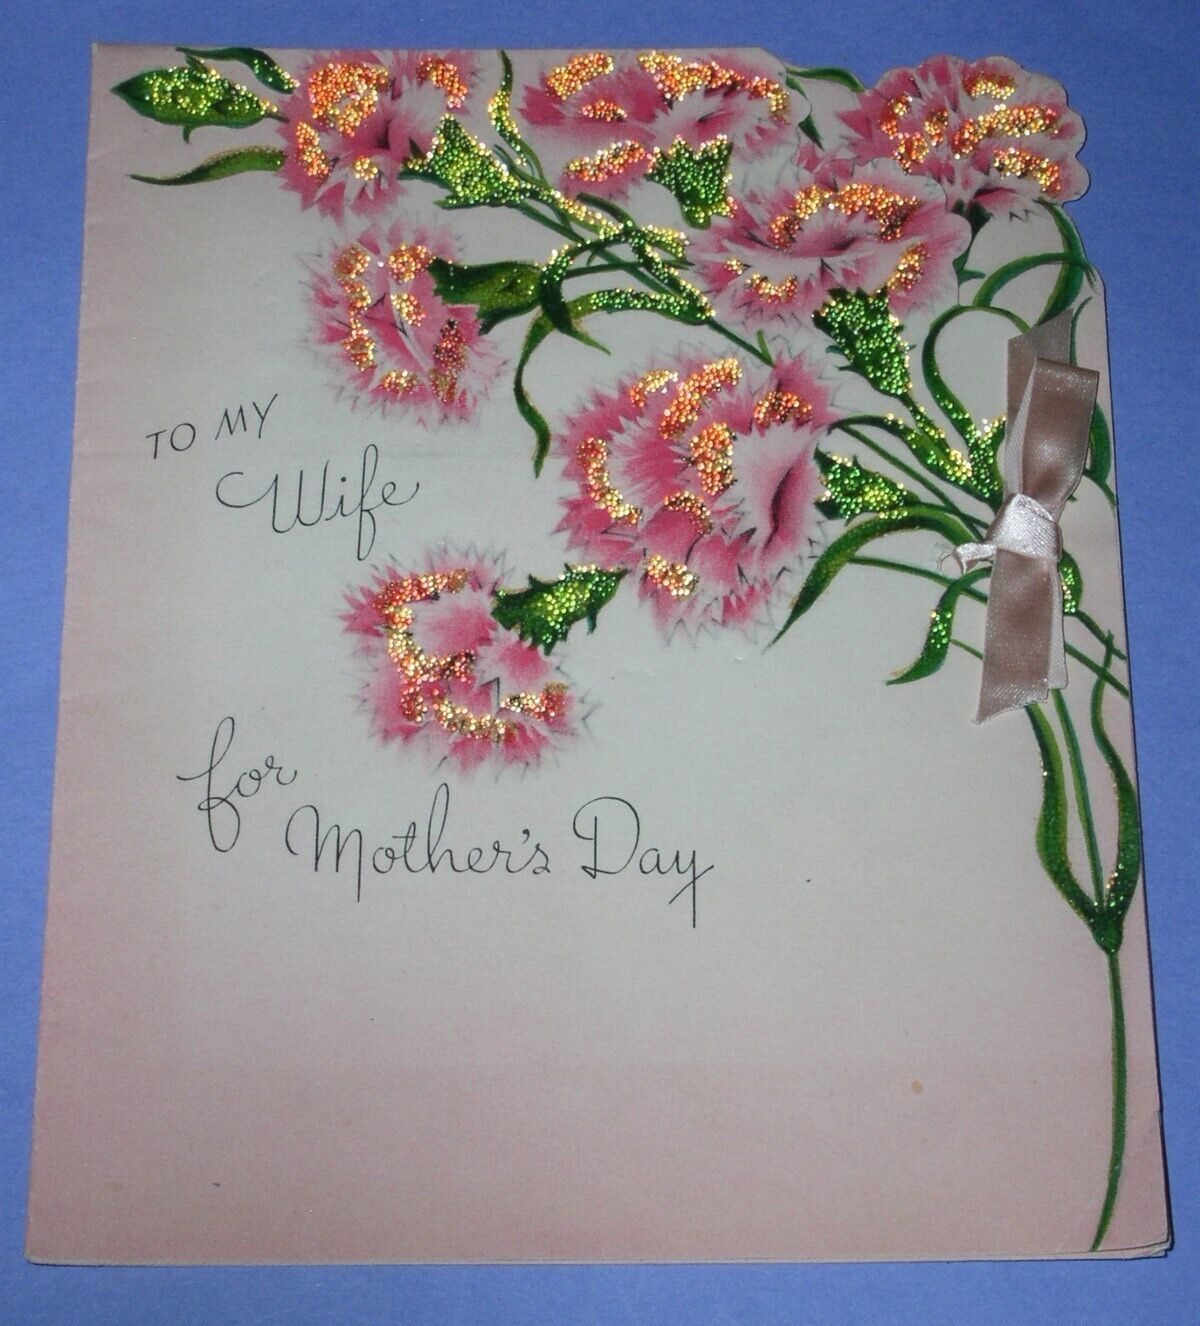 GIBSON MOTHER'S DAY GREETING CARD VINTAGE 1946 RIBBON BOW TO WIFE SCRAPBOOKING - $19.99